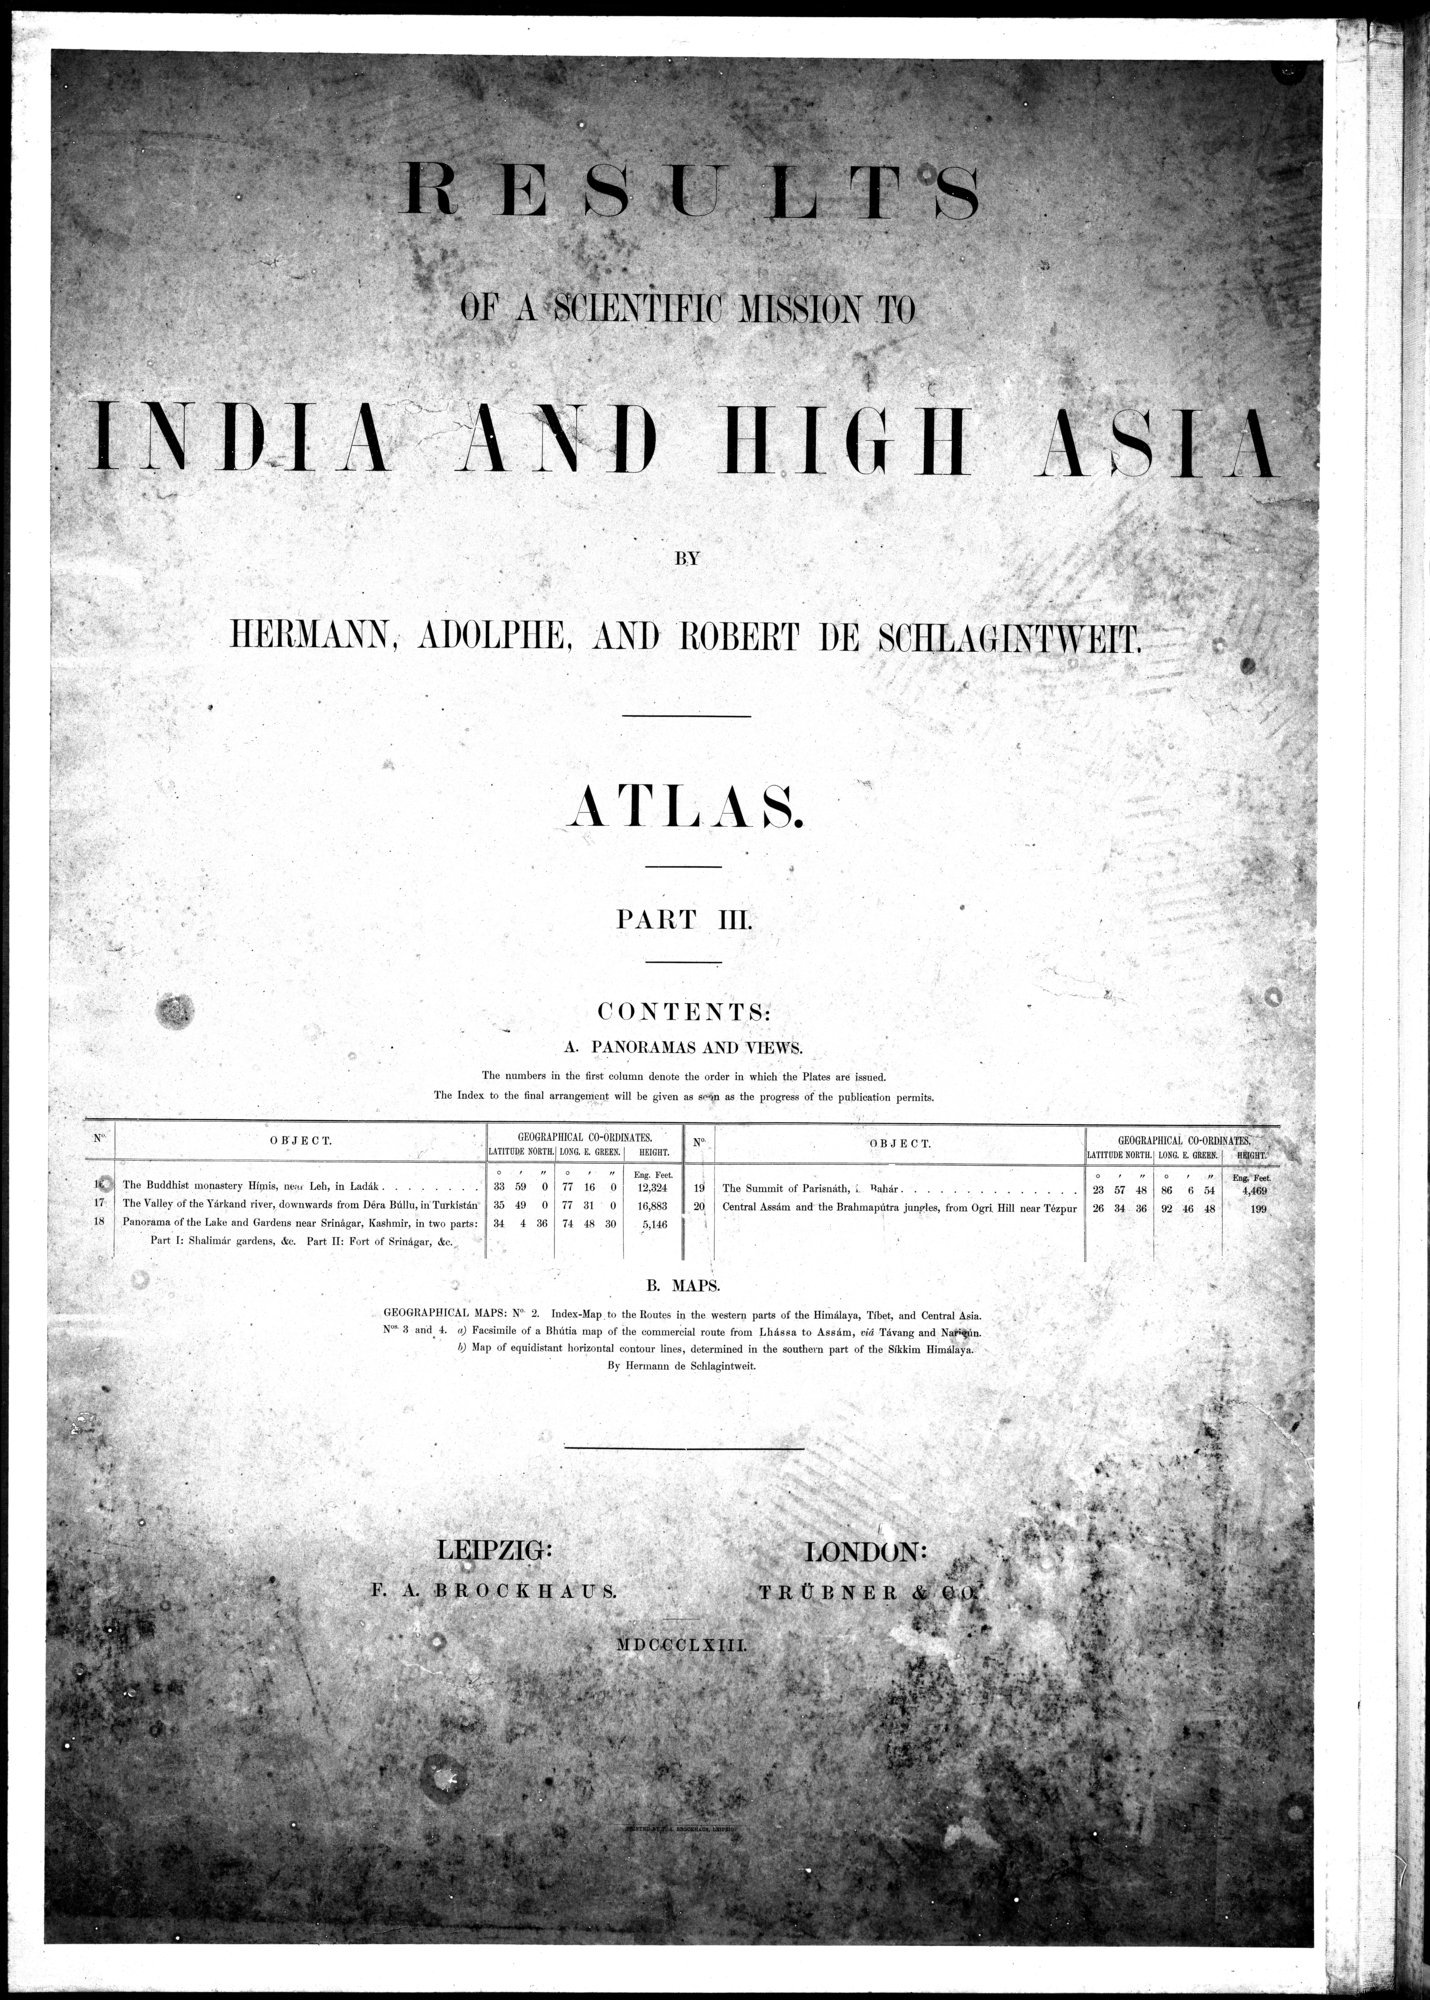 Results of a Scientific Mission to India and High Asia : vol.6 / 2 ページ（白黒高解像度画像）